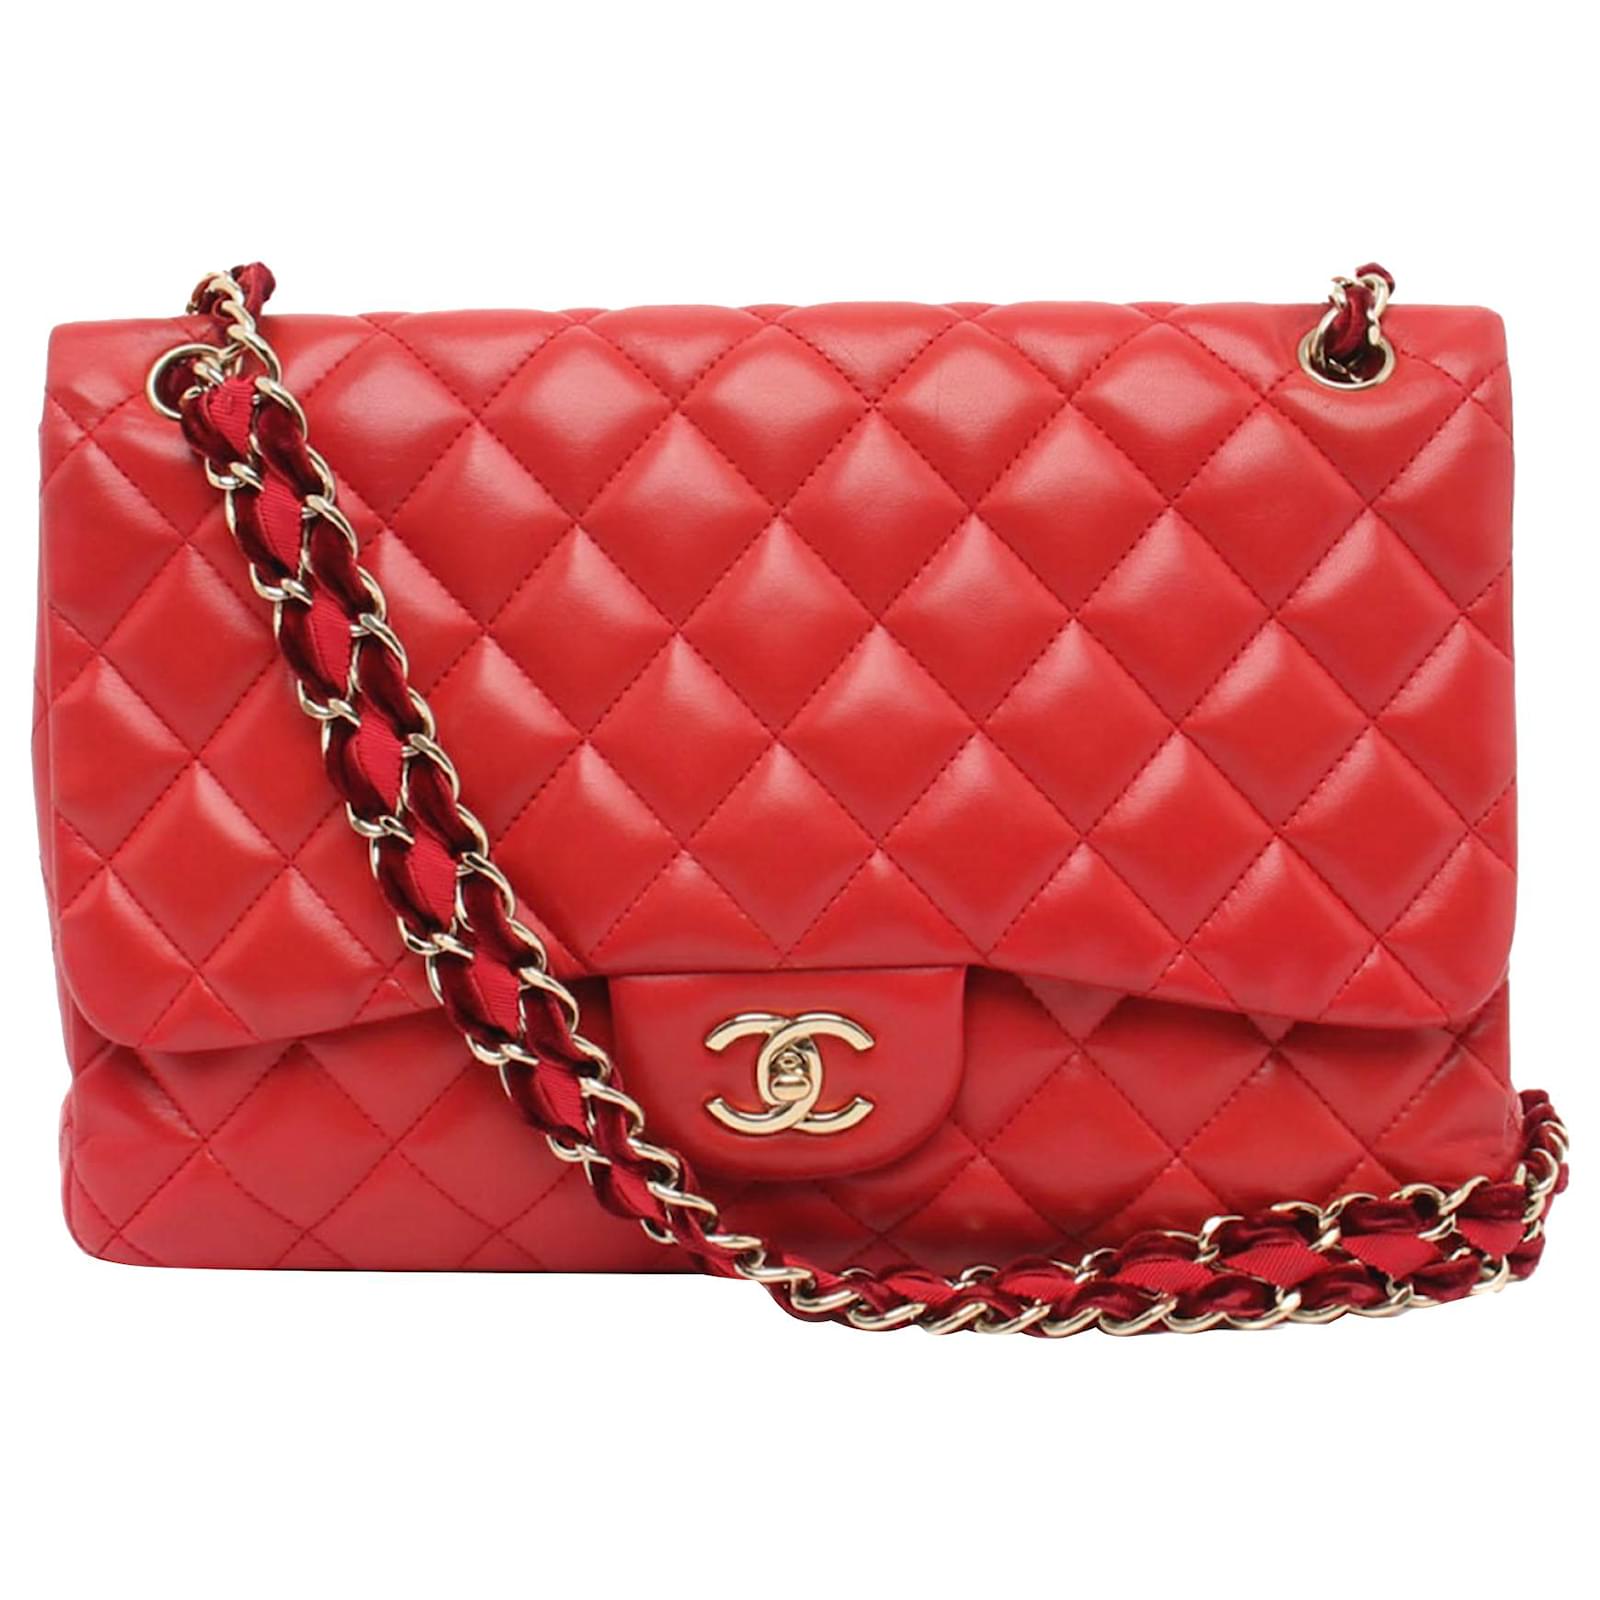 Amazing Chanel Classic shoulder Flap bag in red quilted lambskin leather ,  SHW